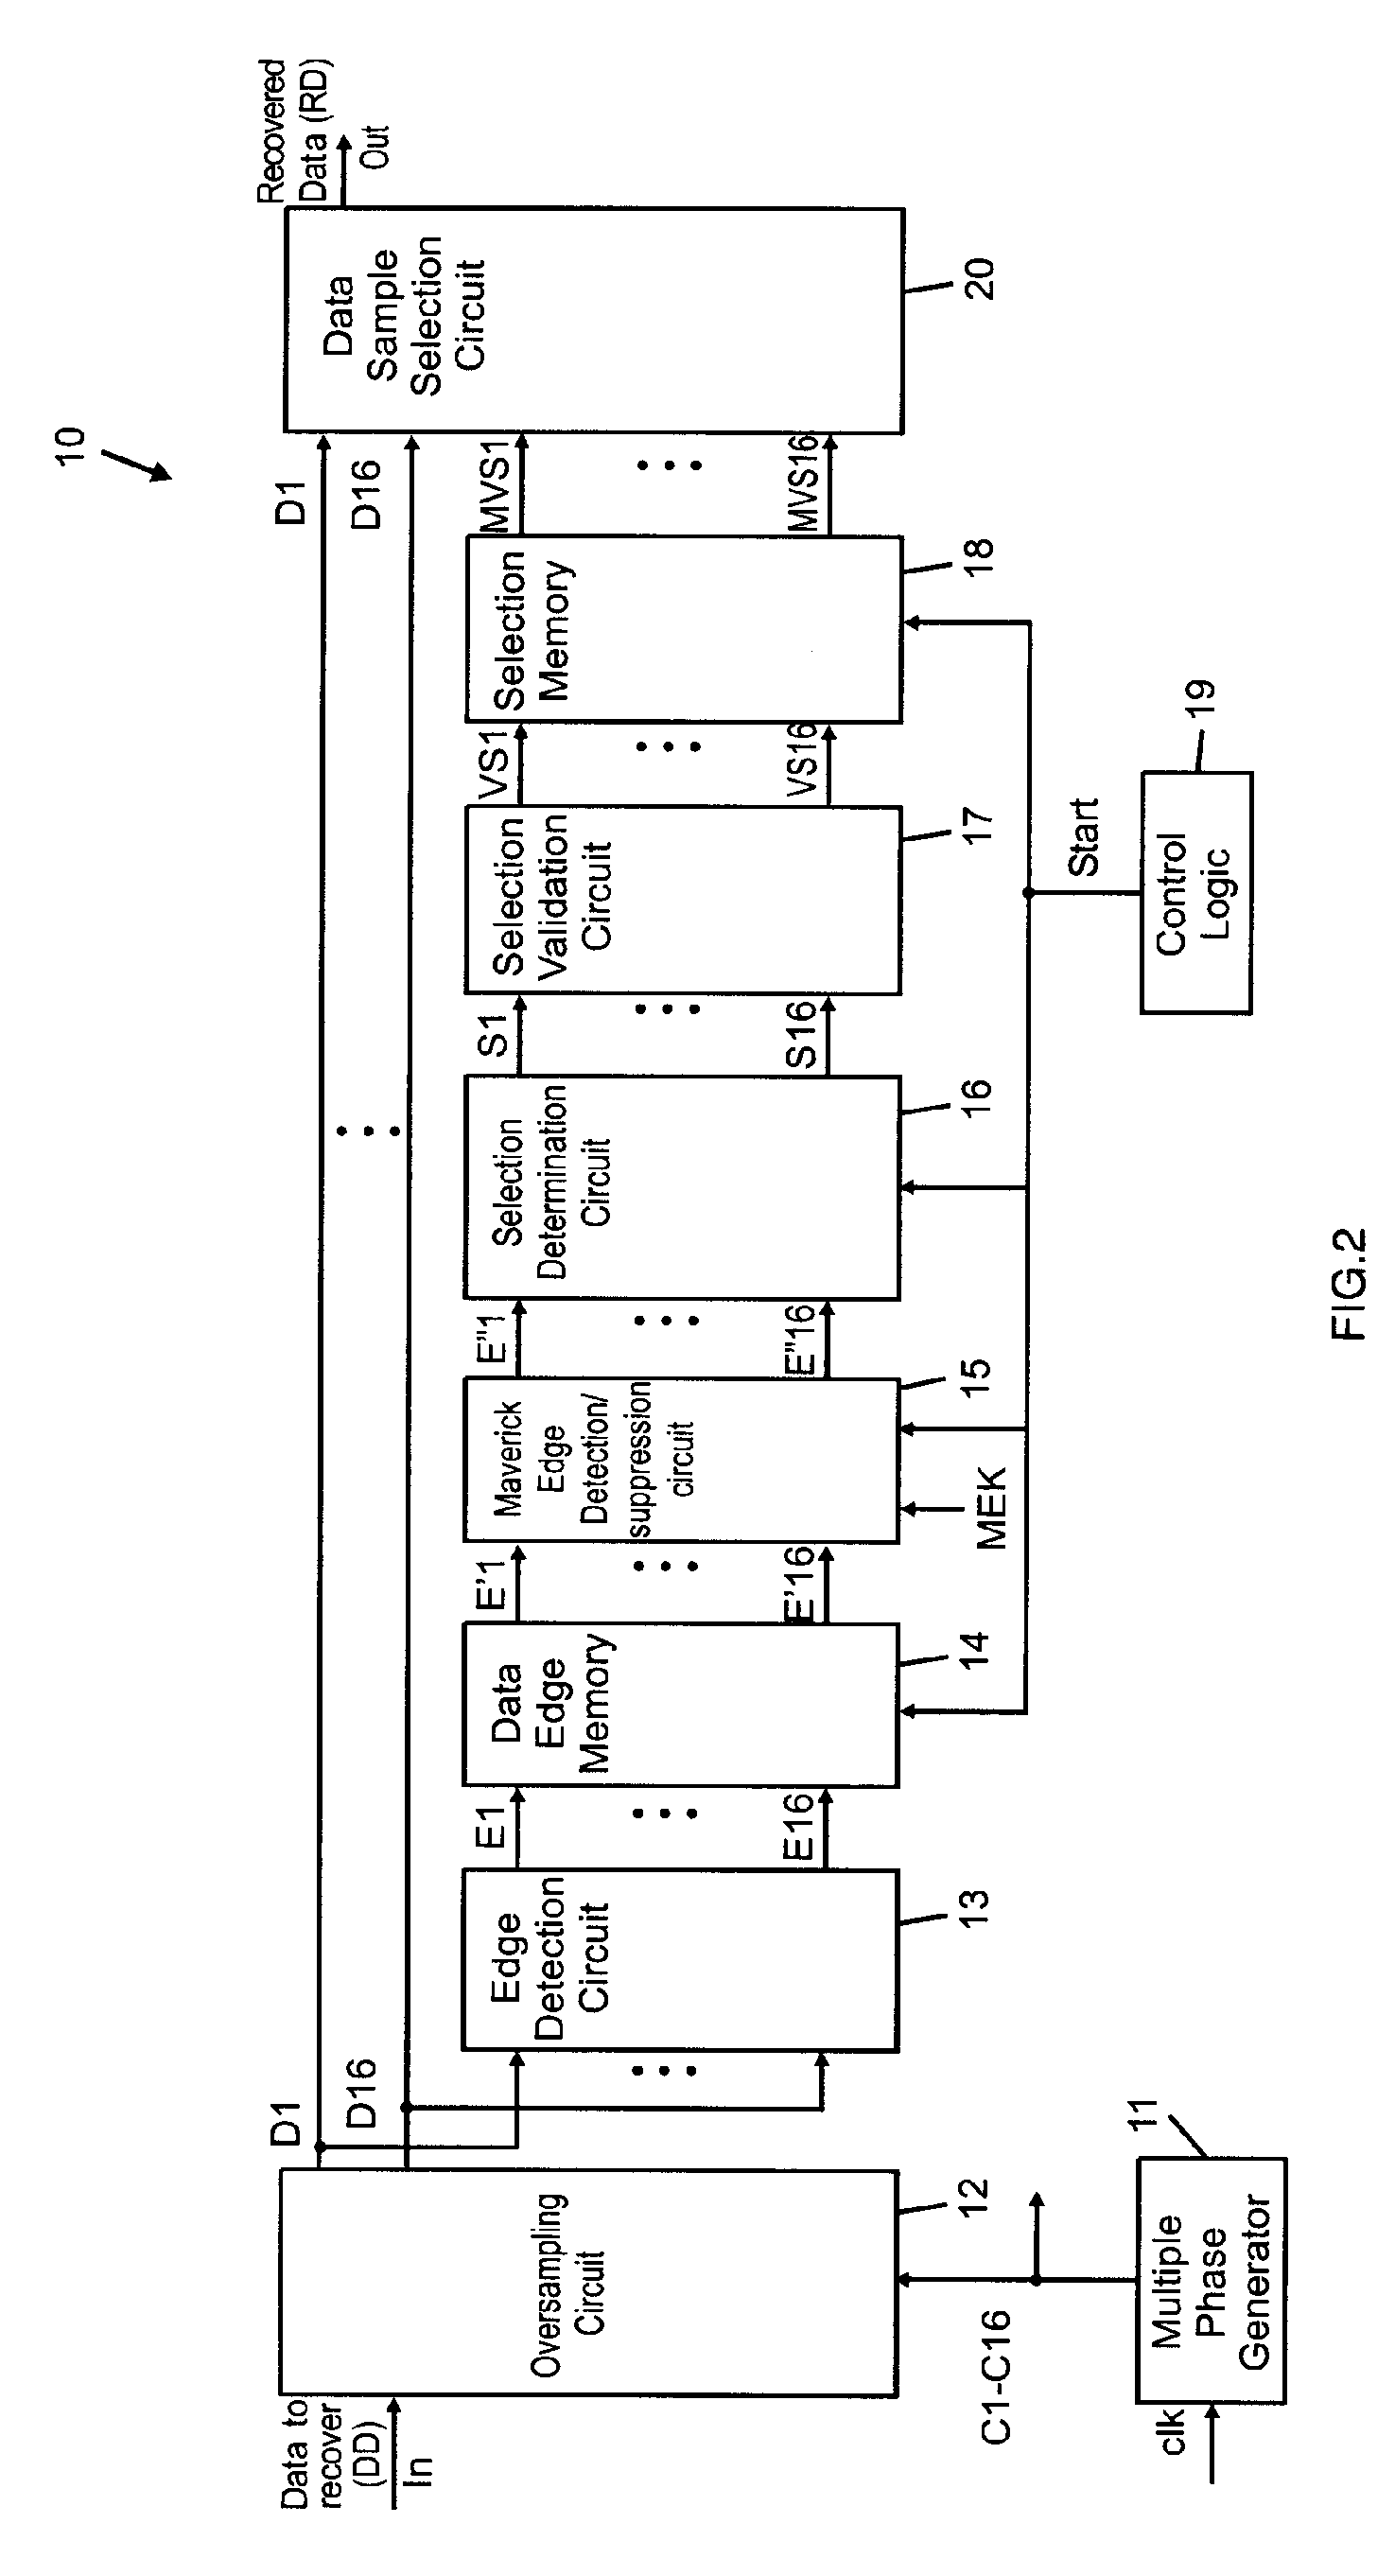 Data recovery circuits using oversampling for maverick edge detection/suppression